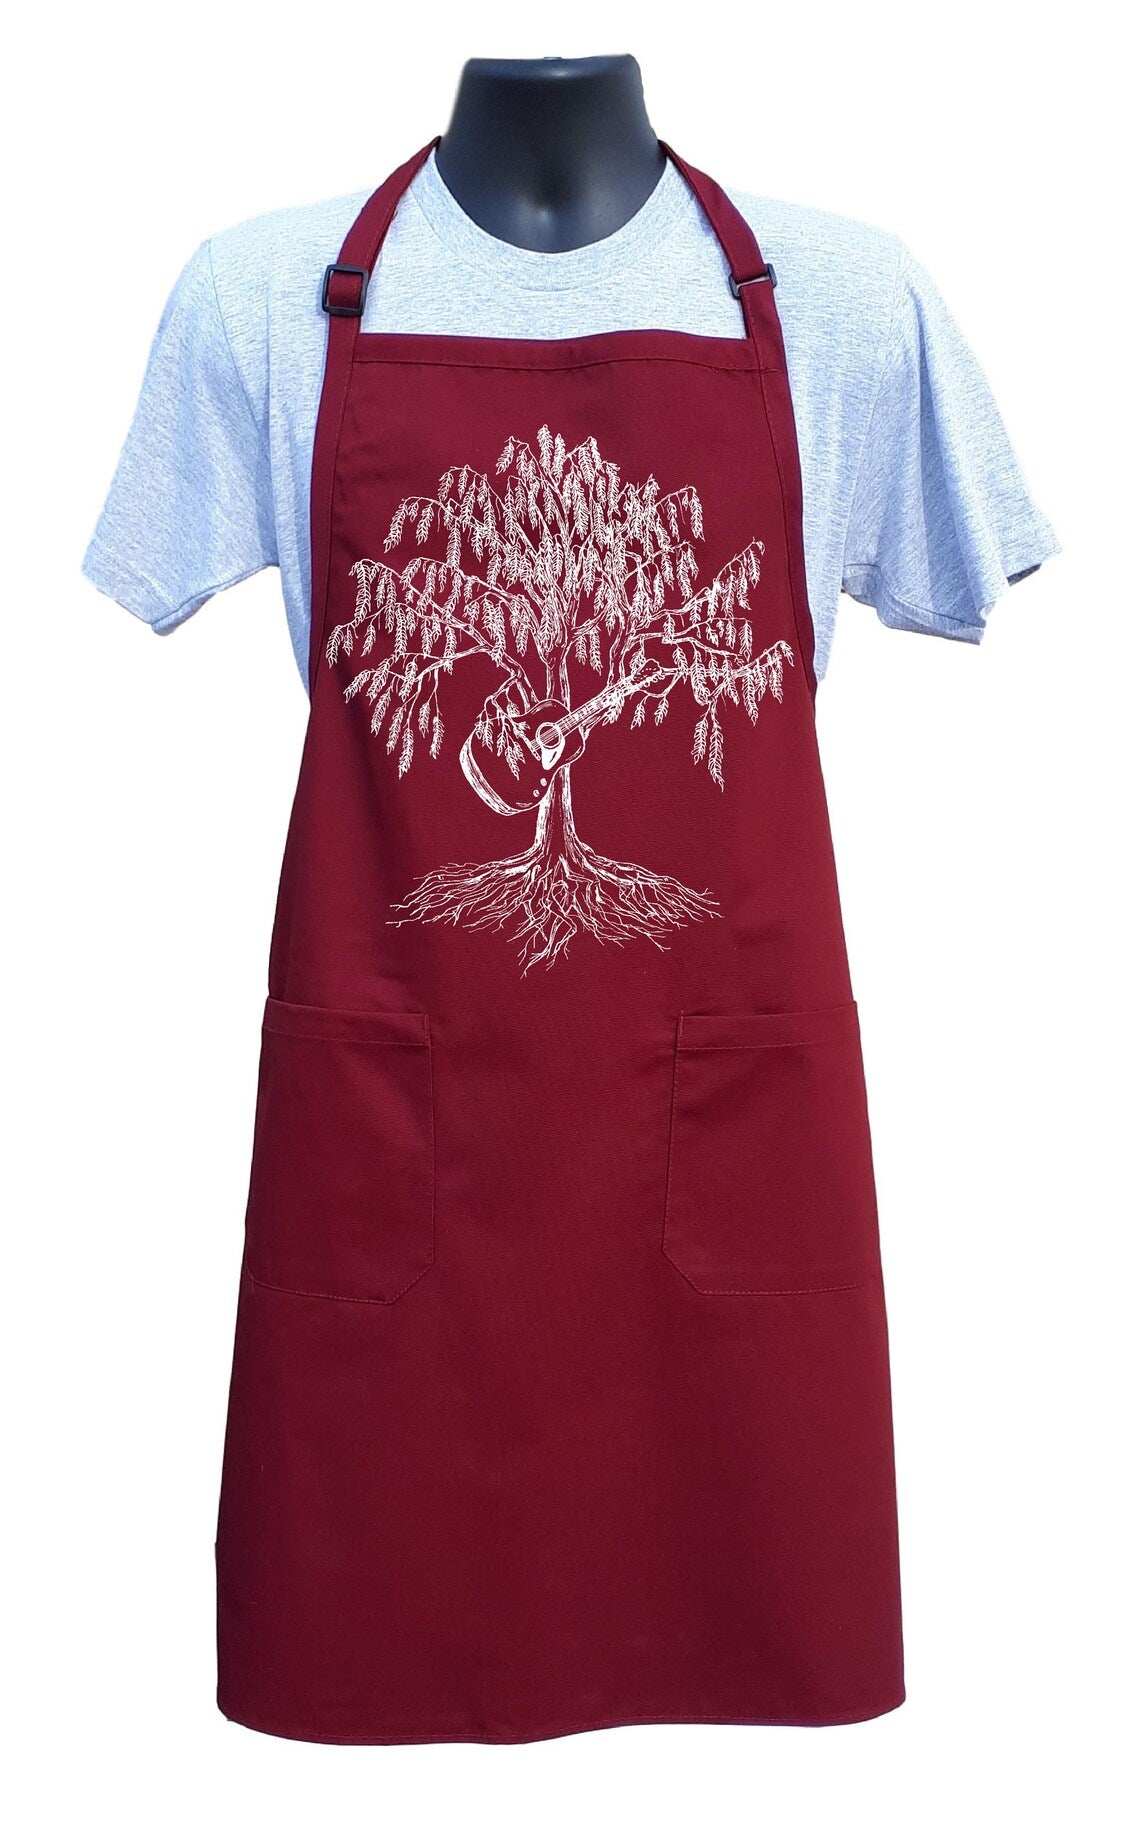 Weeping Willow Guitar Chef's Apron with Pockets